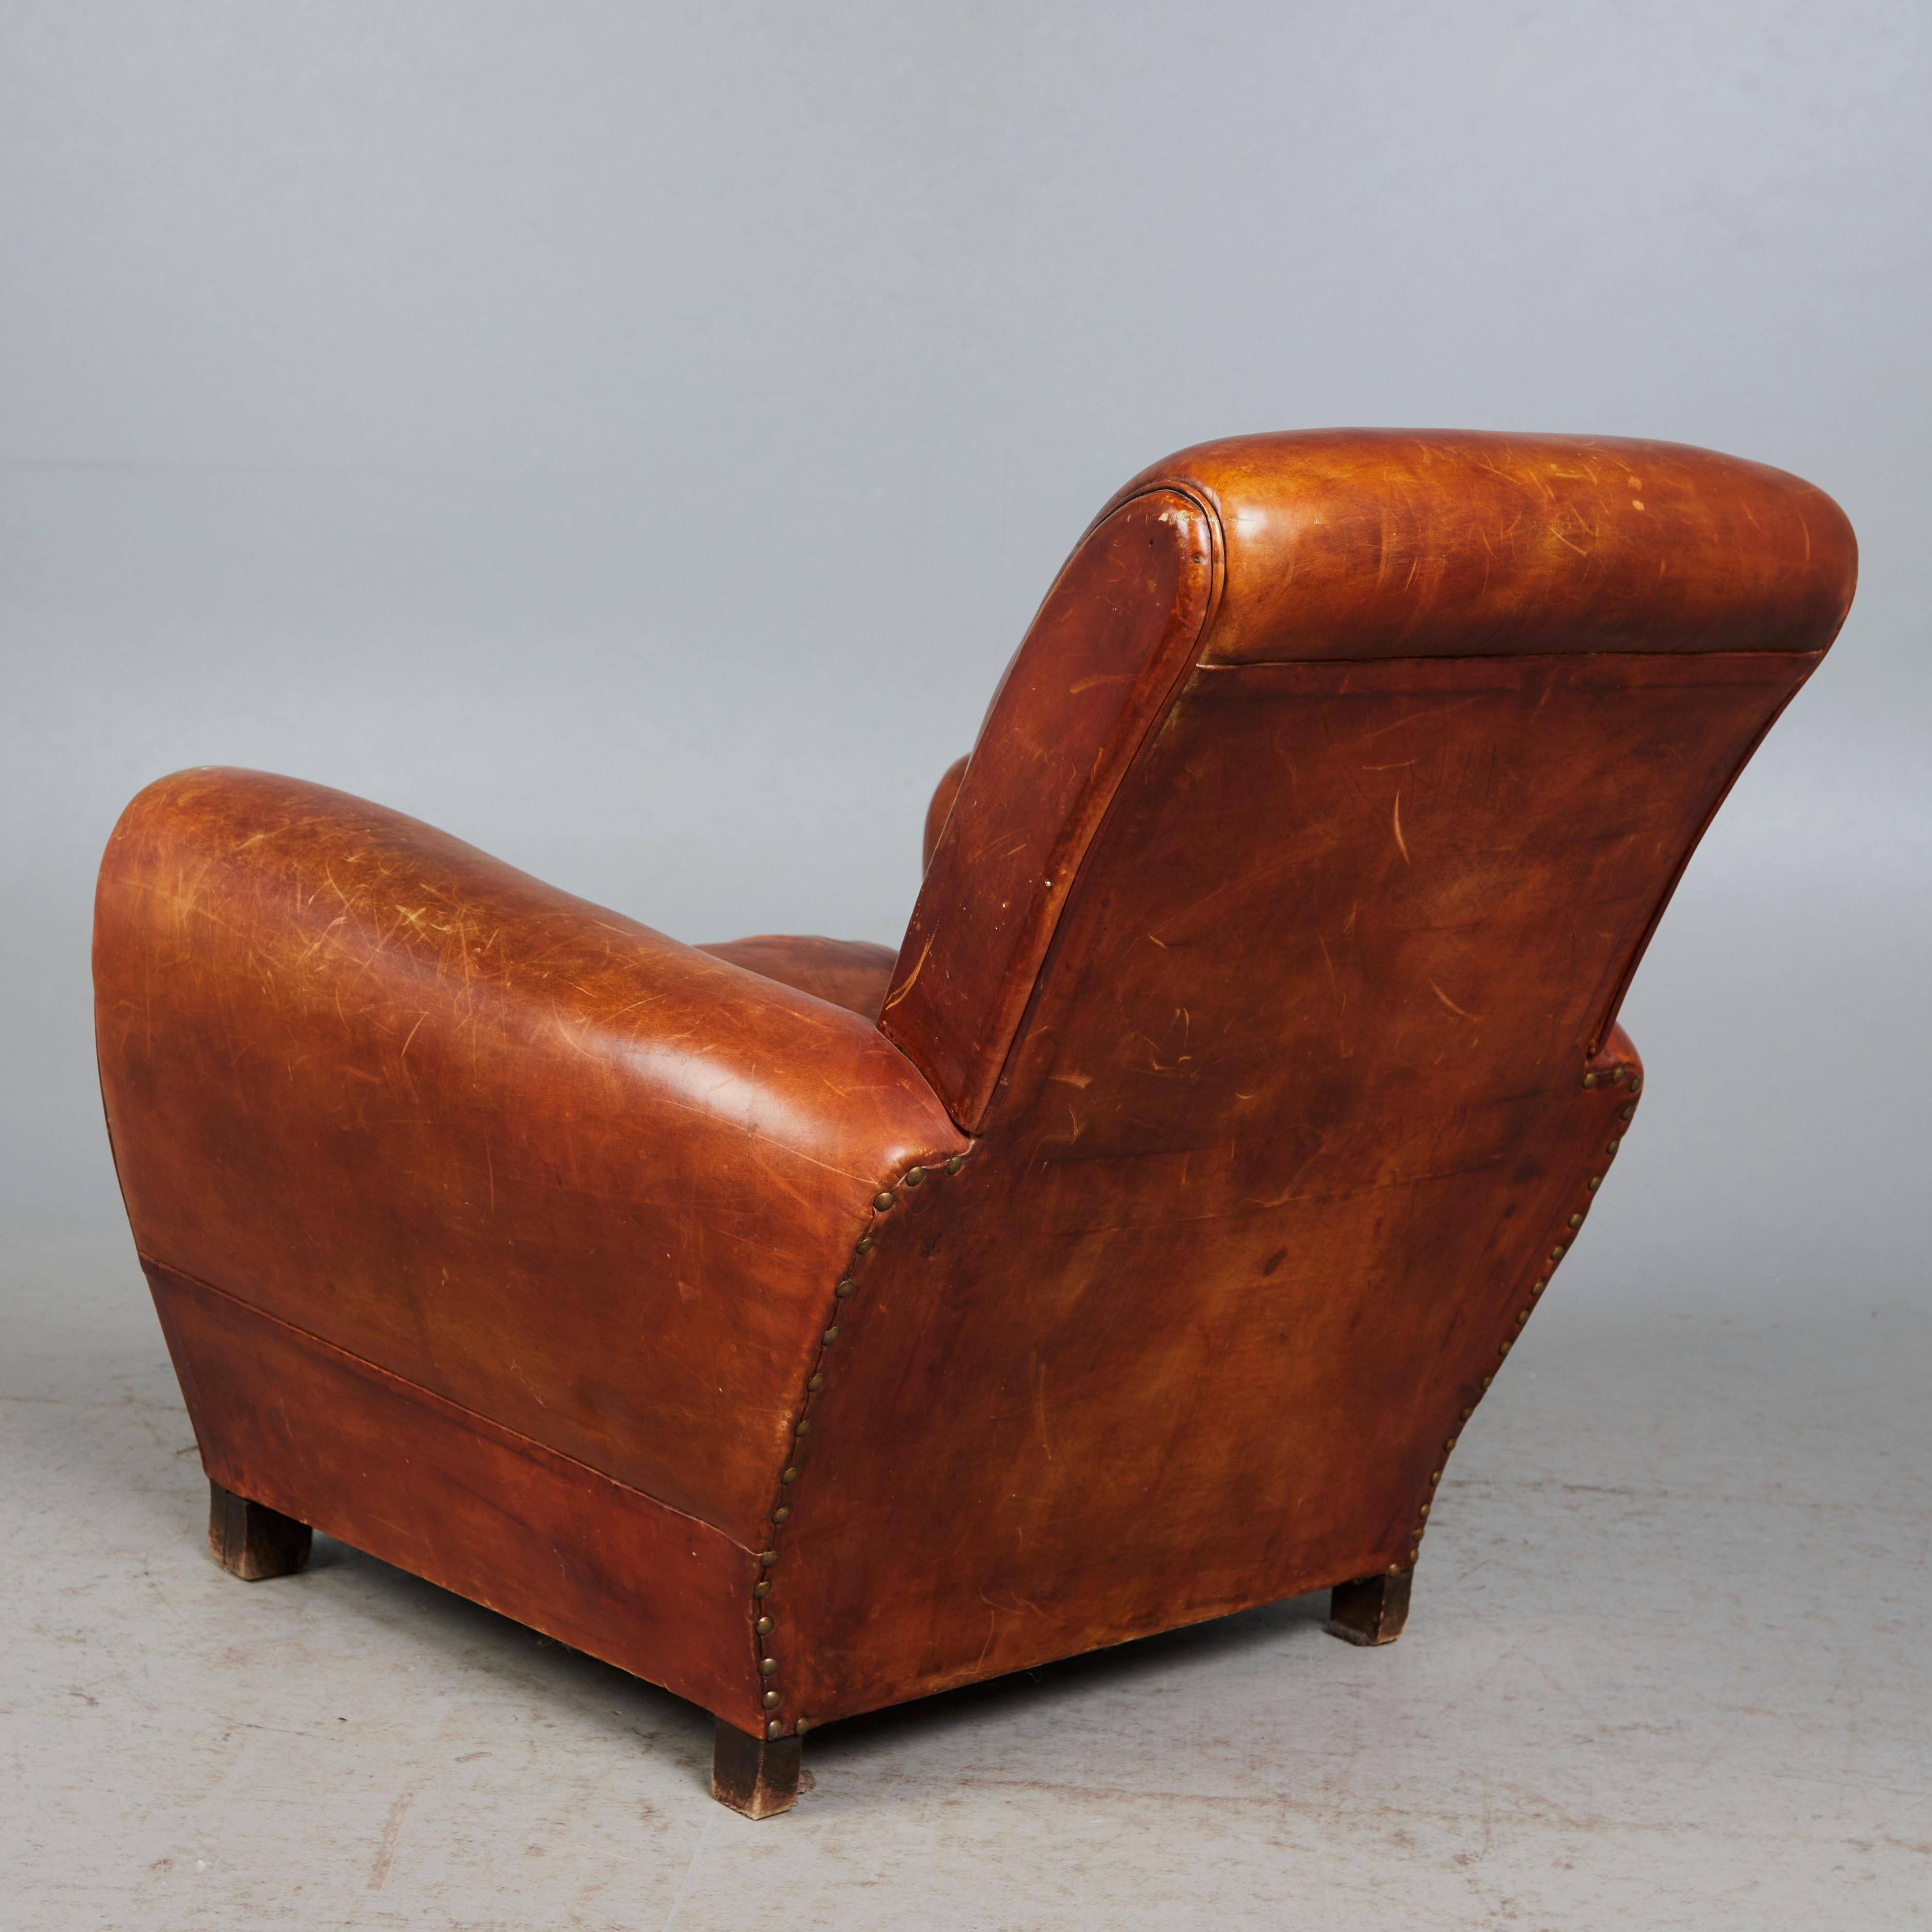 Classic Art Déco leather upholstered brown club chair / Lounge chair . France 1930s. 
Original, good general  condition.
Wooden feet.
Studded trim on the back
Signs of use and age-related wear but in a good condition.
Leather partially